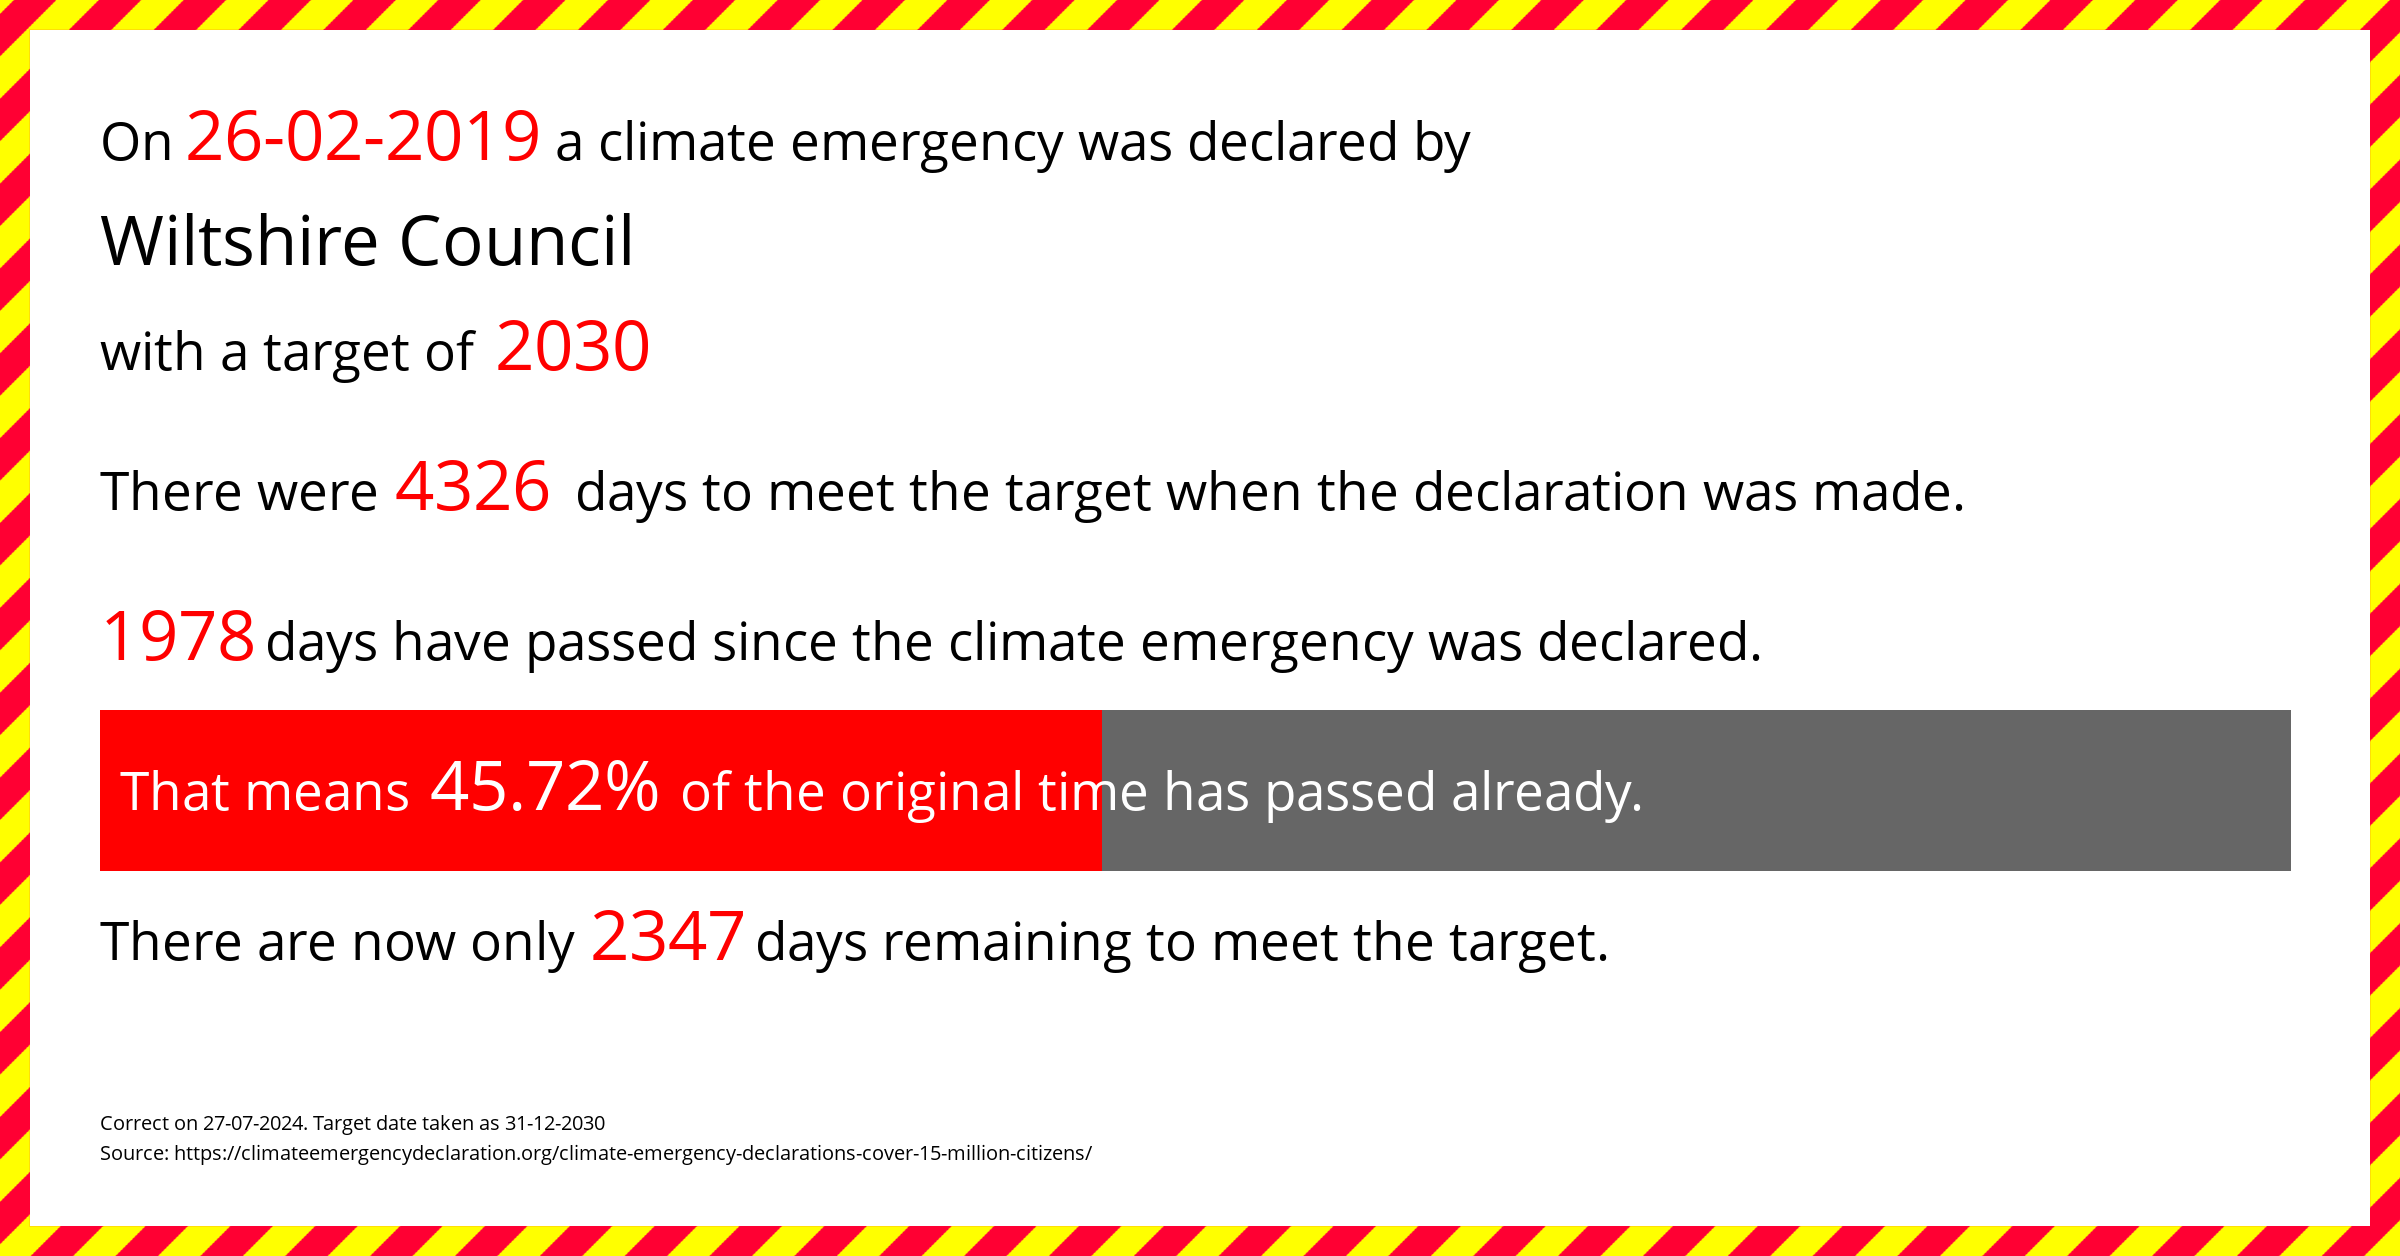 Wiltshire Council declared a Climate emergency on Tuesday 26th February 2019, with a target of 2030.